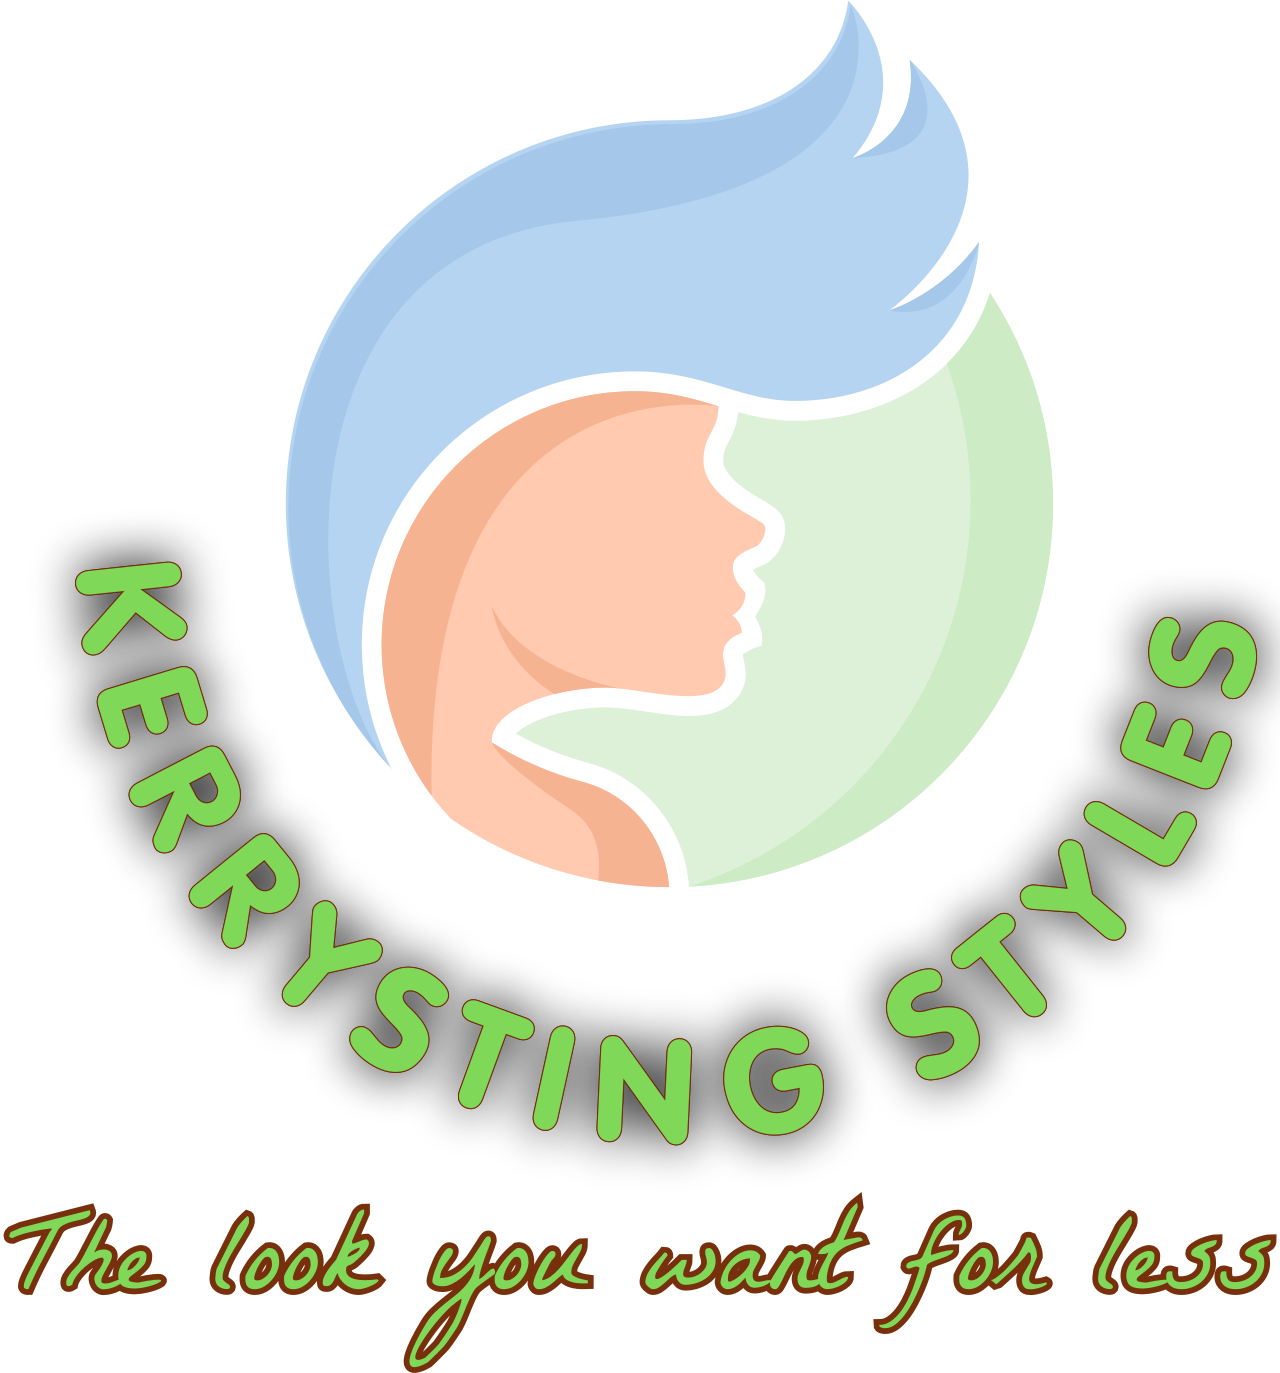 KERRYSTING STYLES 's web page